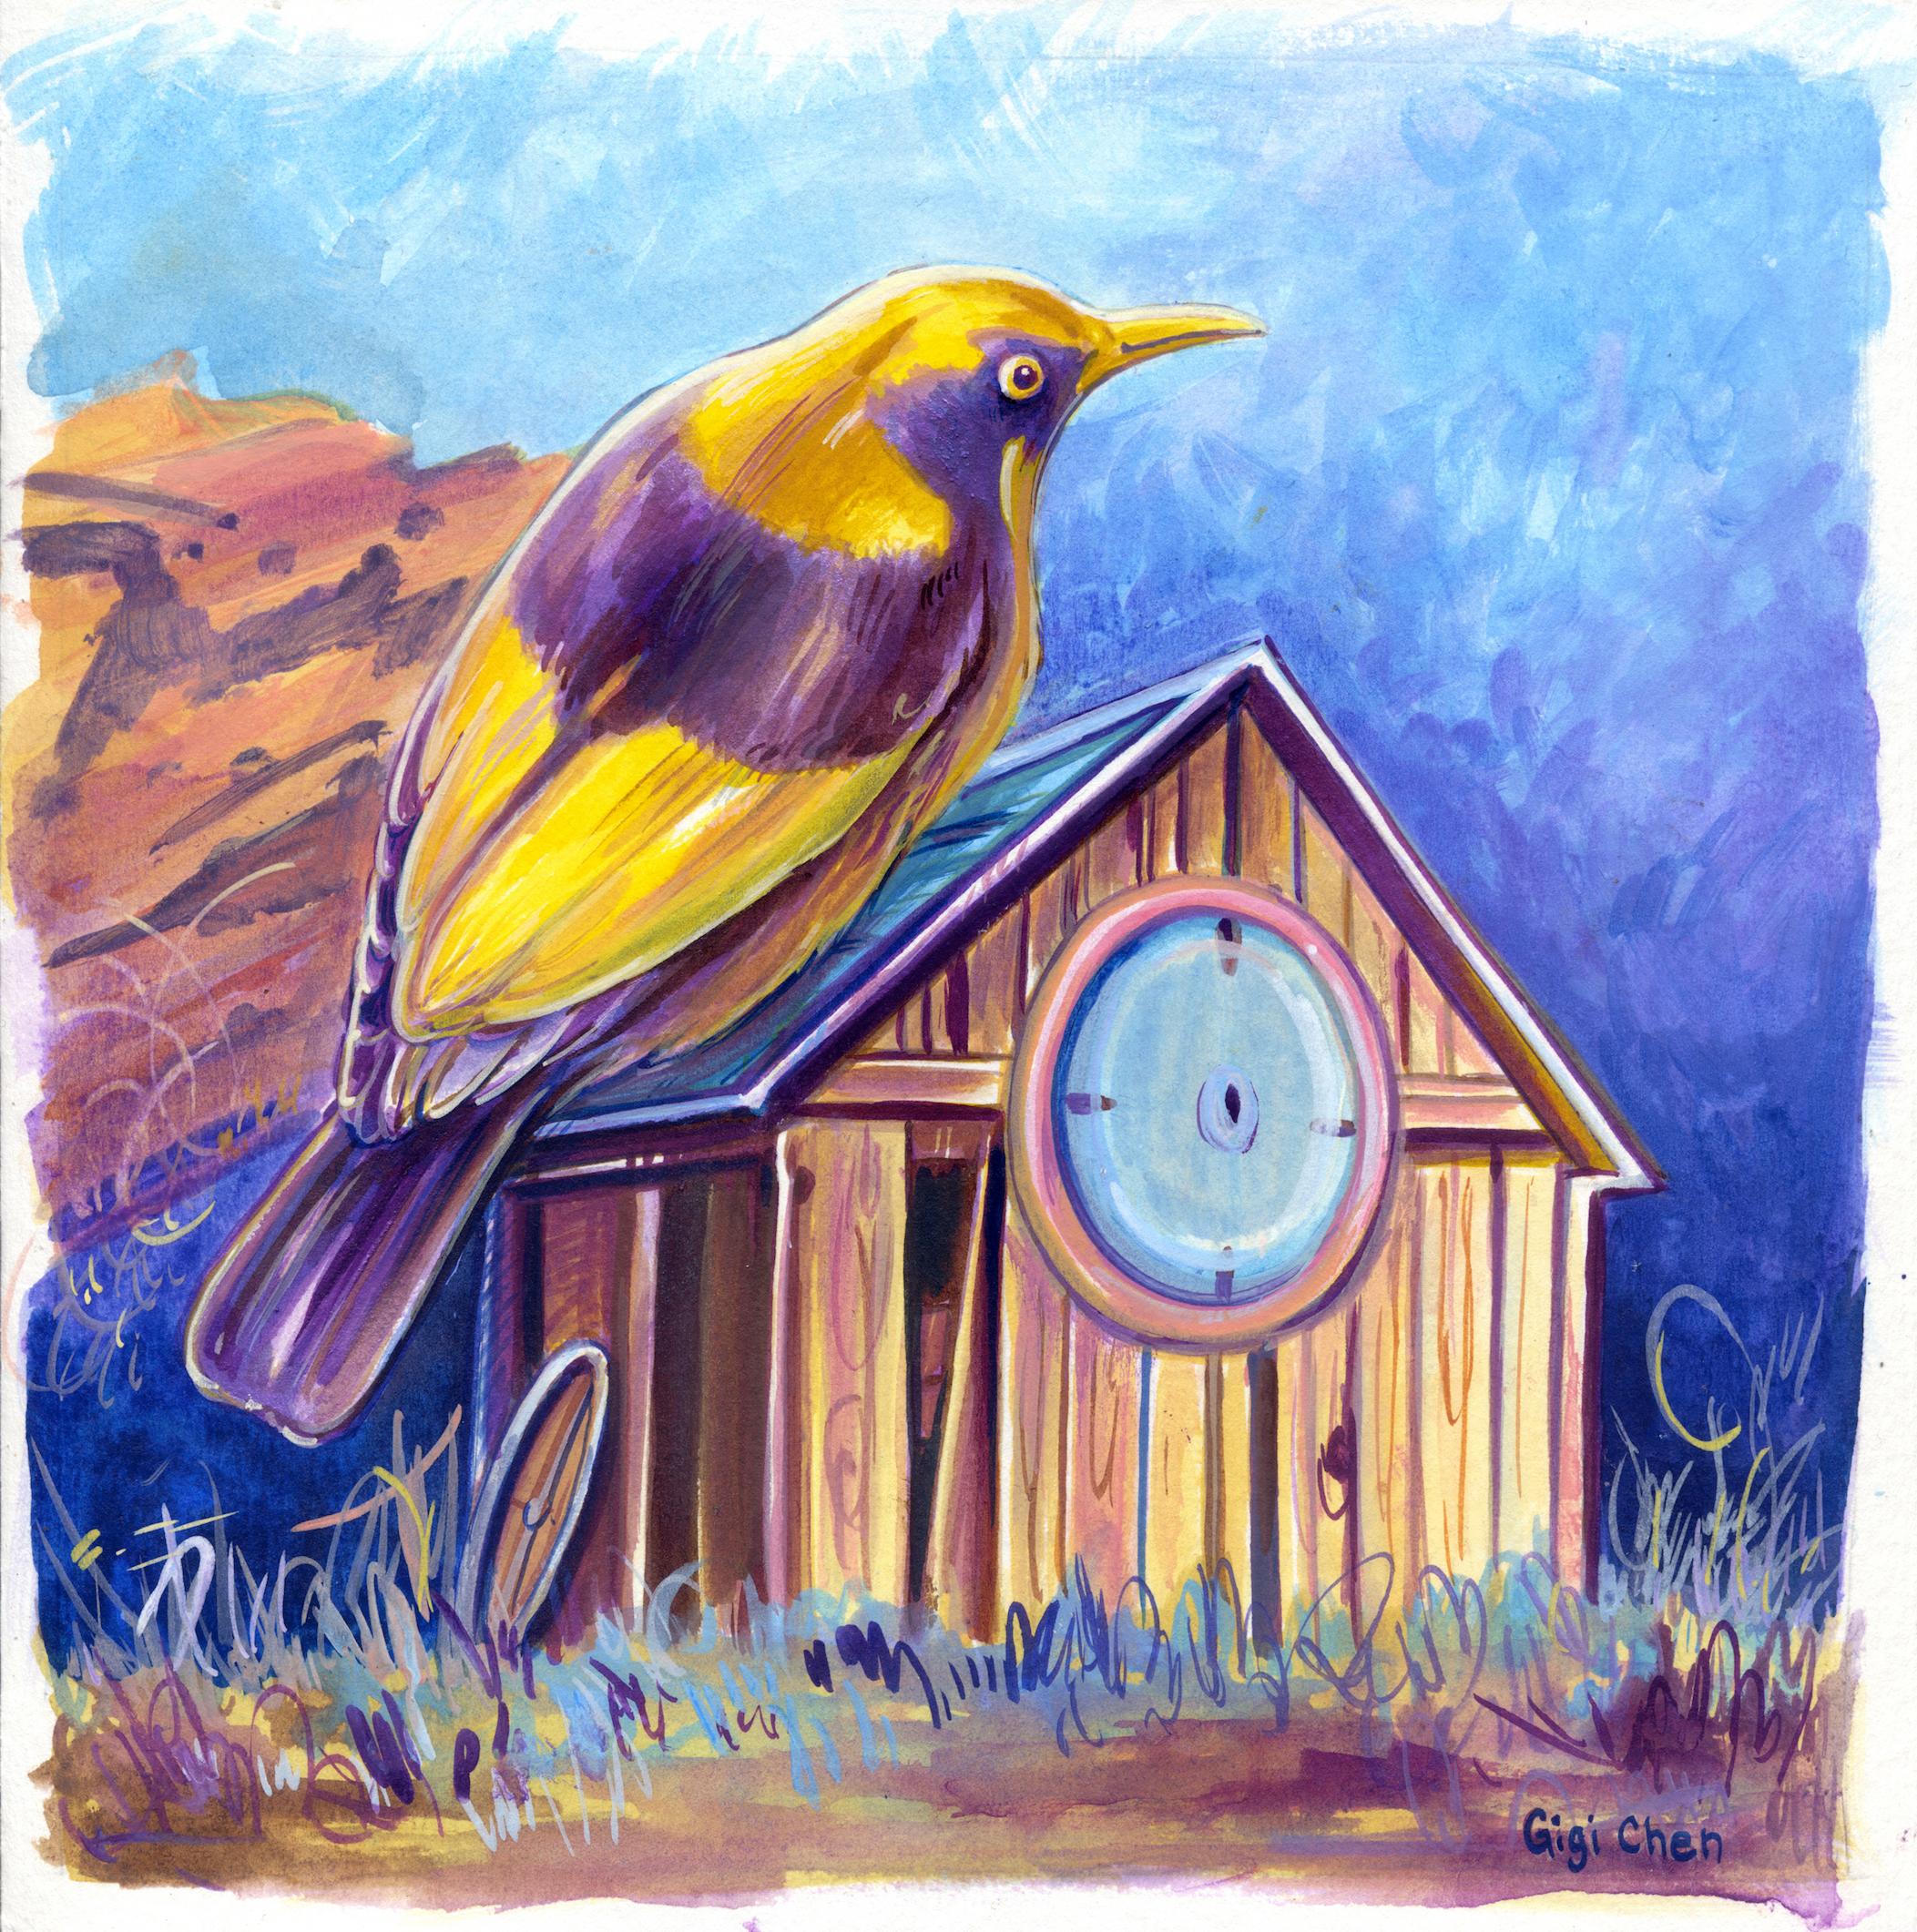 Settle In, yellow Bower bird, landscape drawing, house, framed work on paper